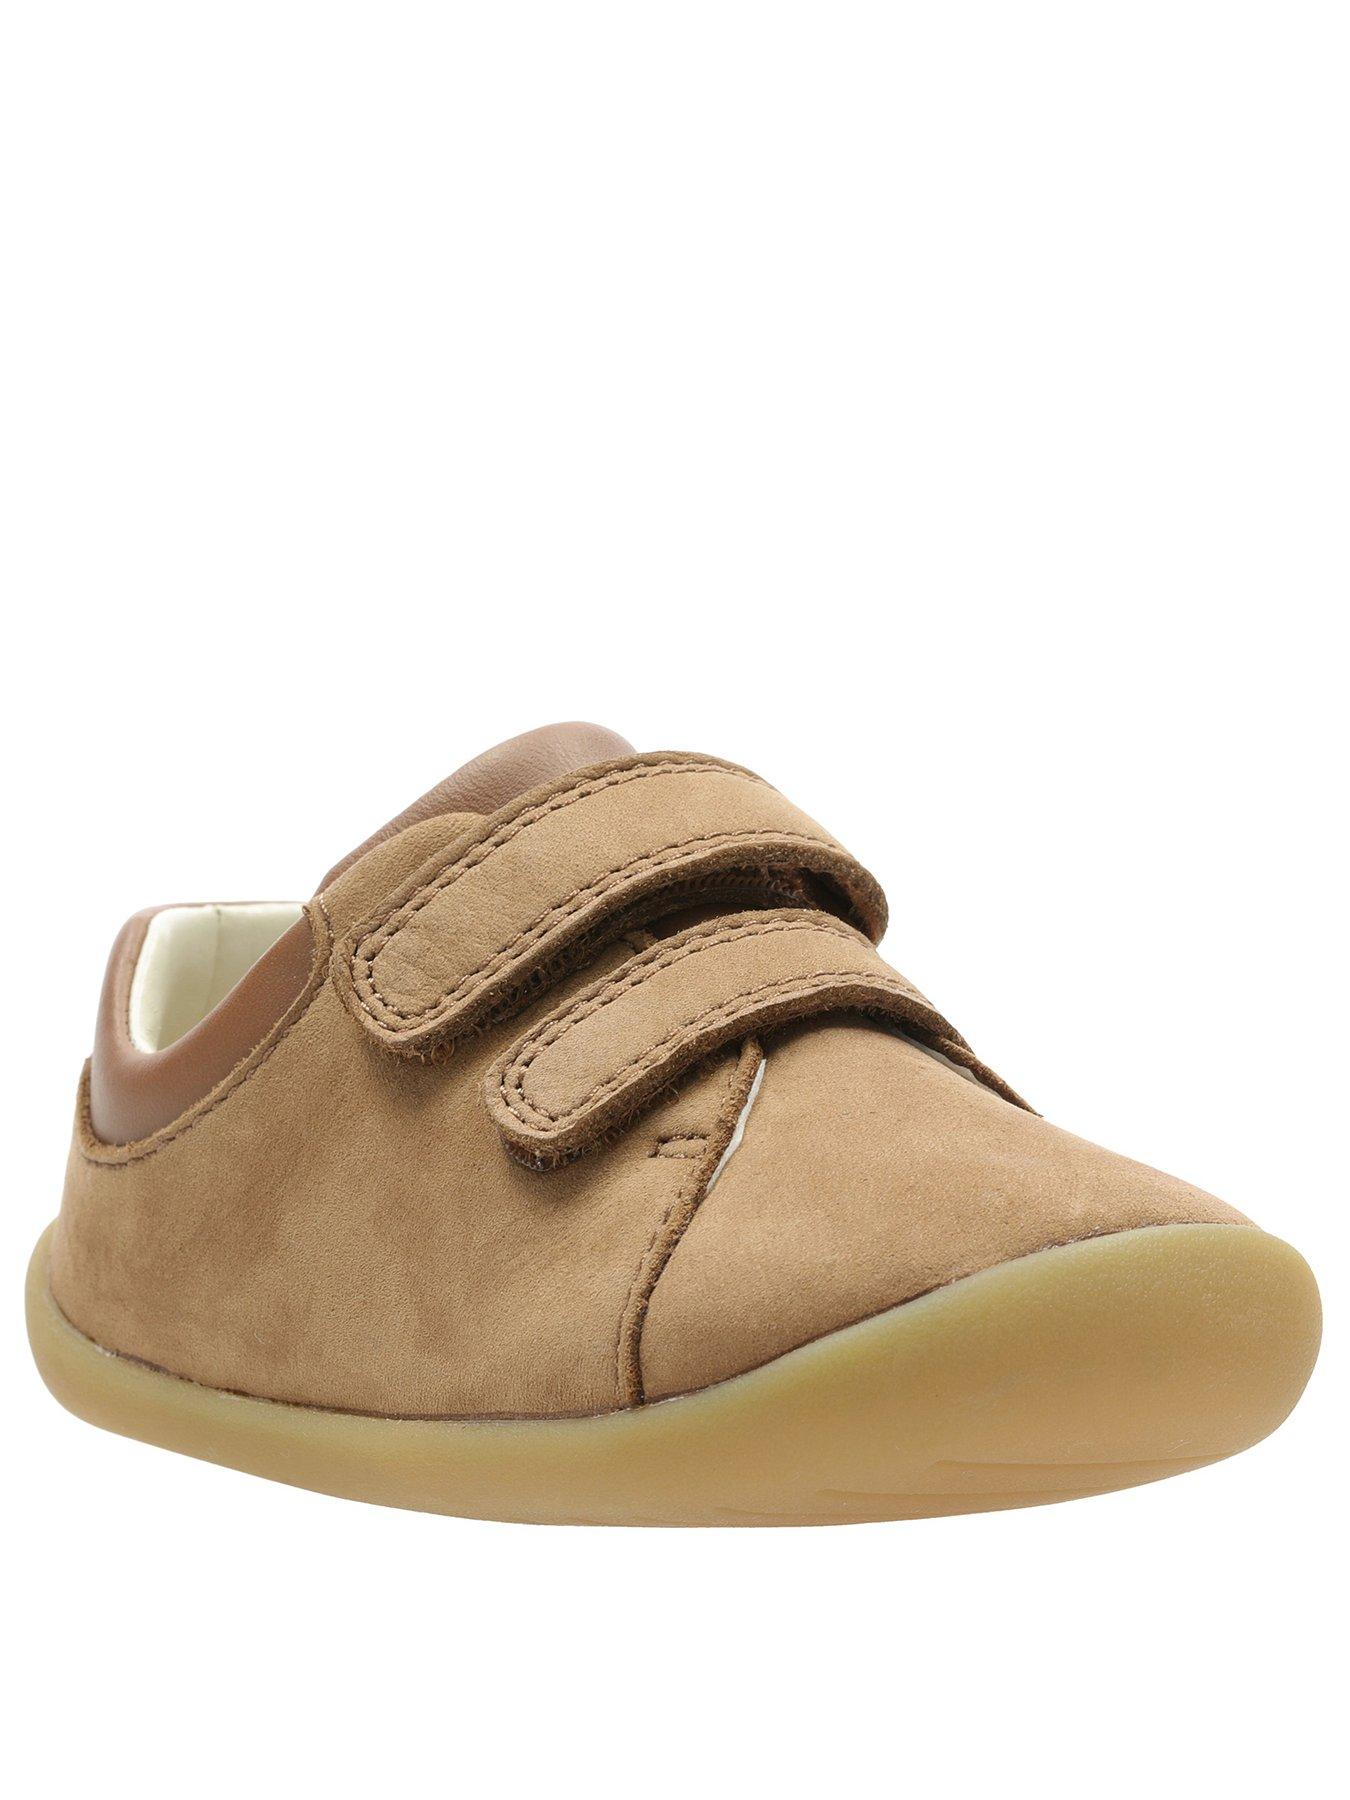 Boys Clarks First Shoes Cloud Sea 